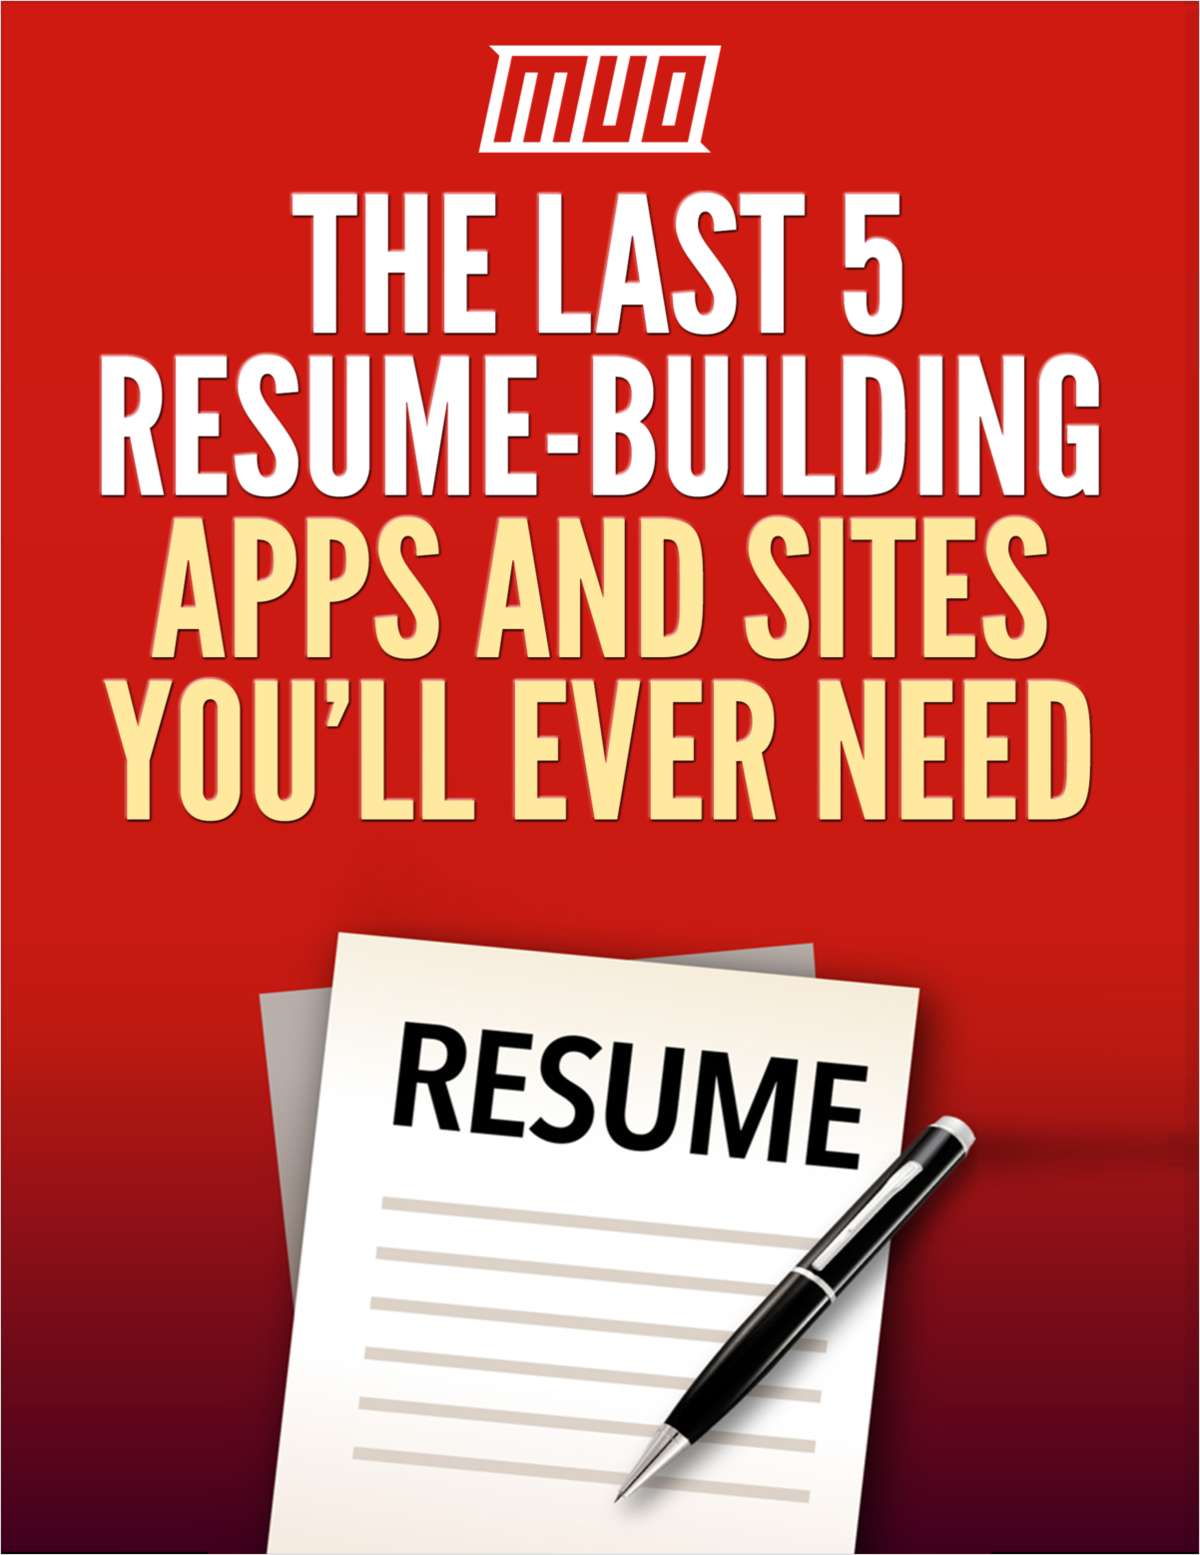 The Last 5 Resume-Building Apps and Sites You'll Ever Need